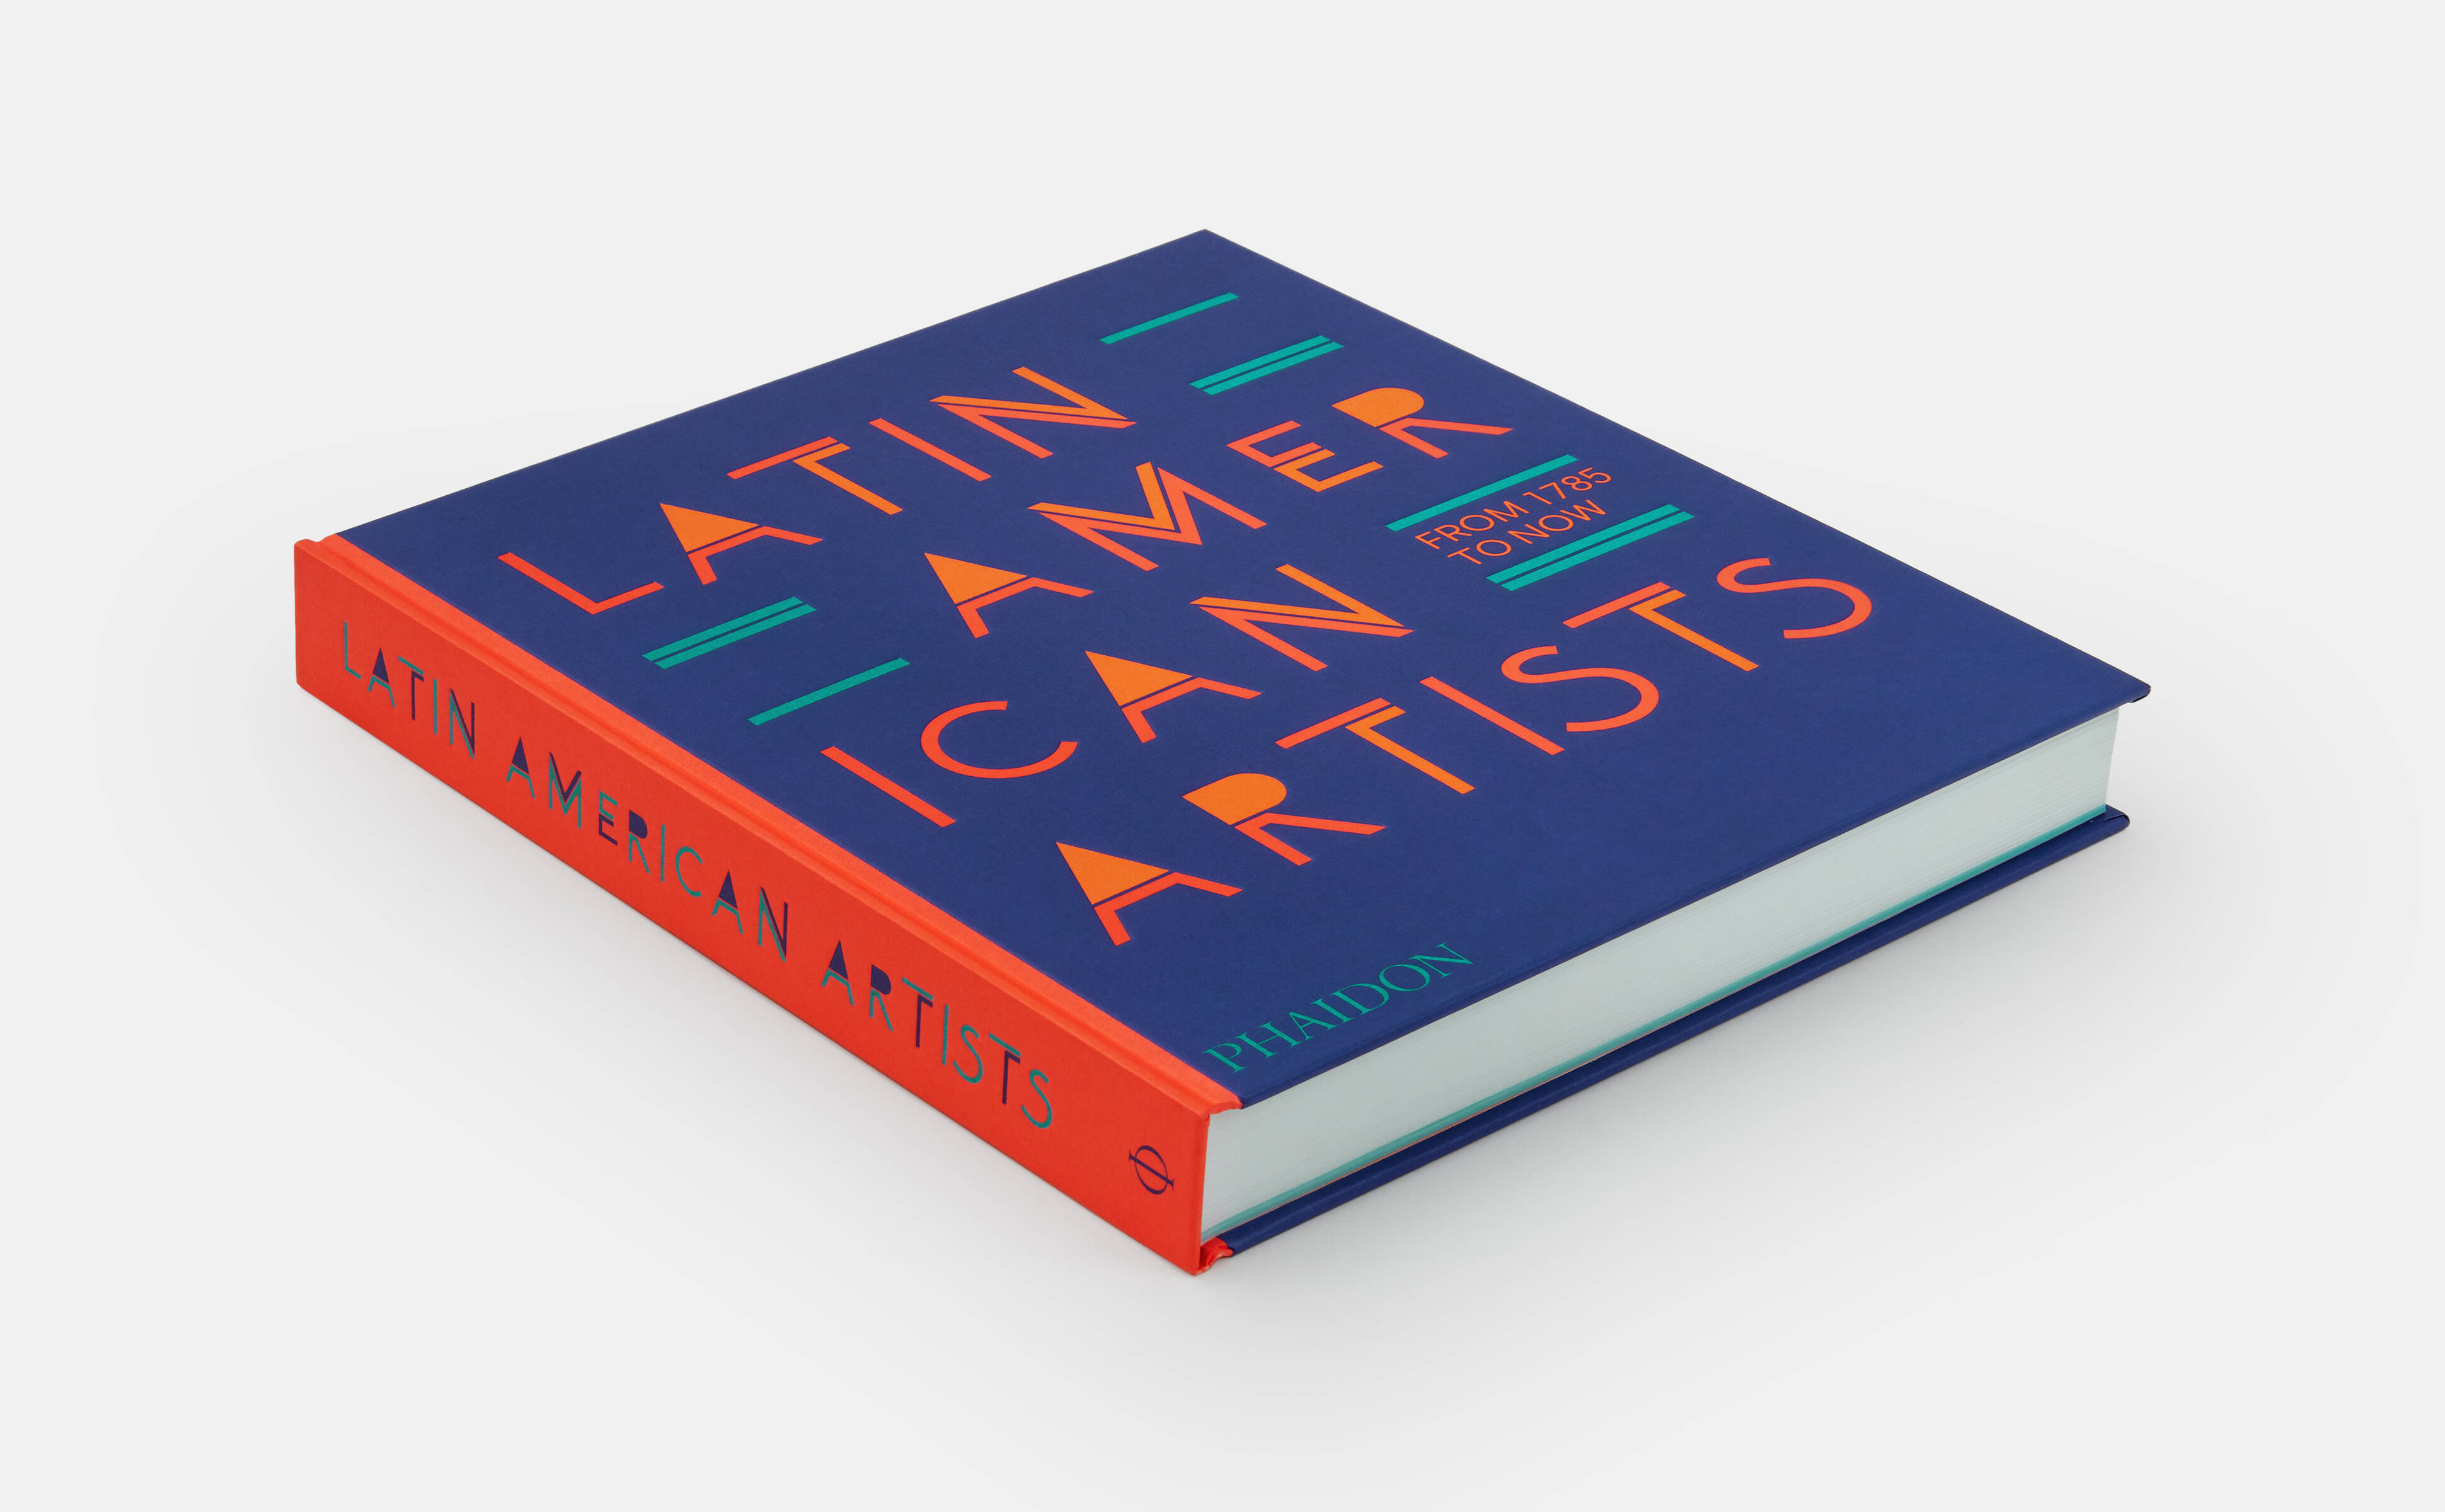 Latin American Artists and Money